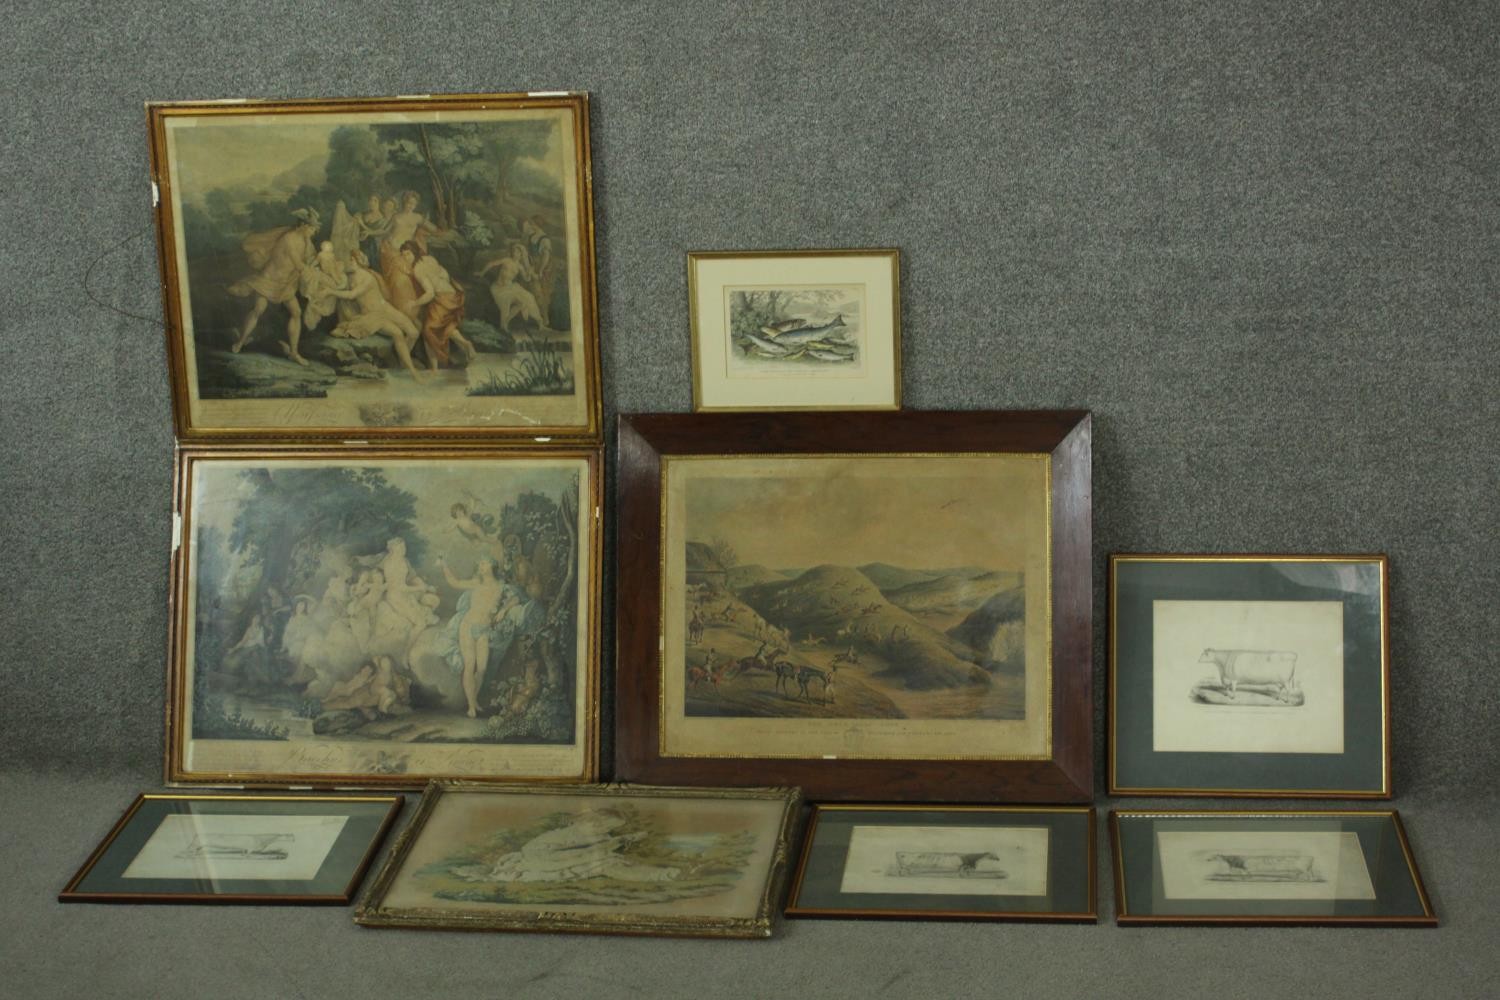 A collection of nine 19th century hand painted engravings of various subjects, including cows and